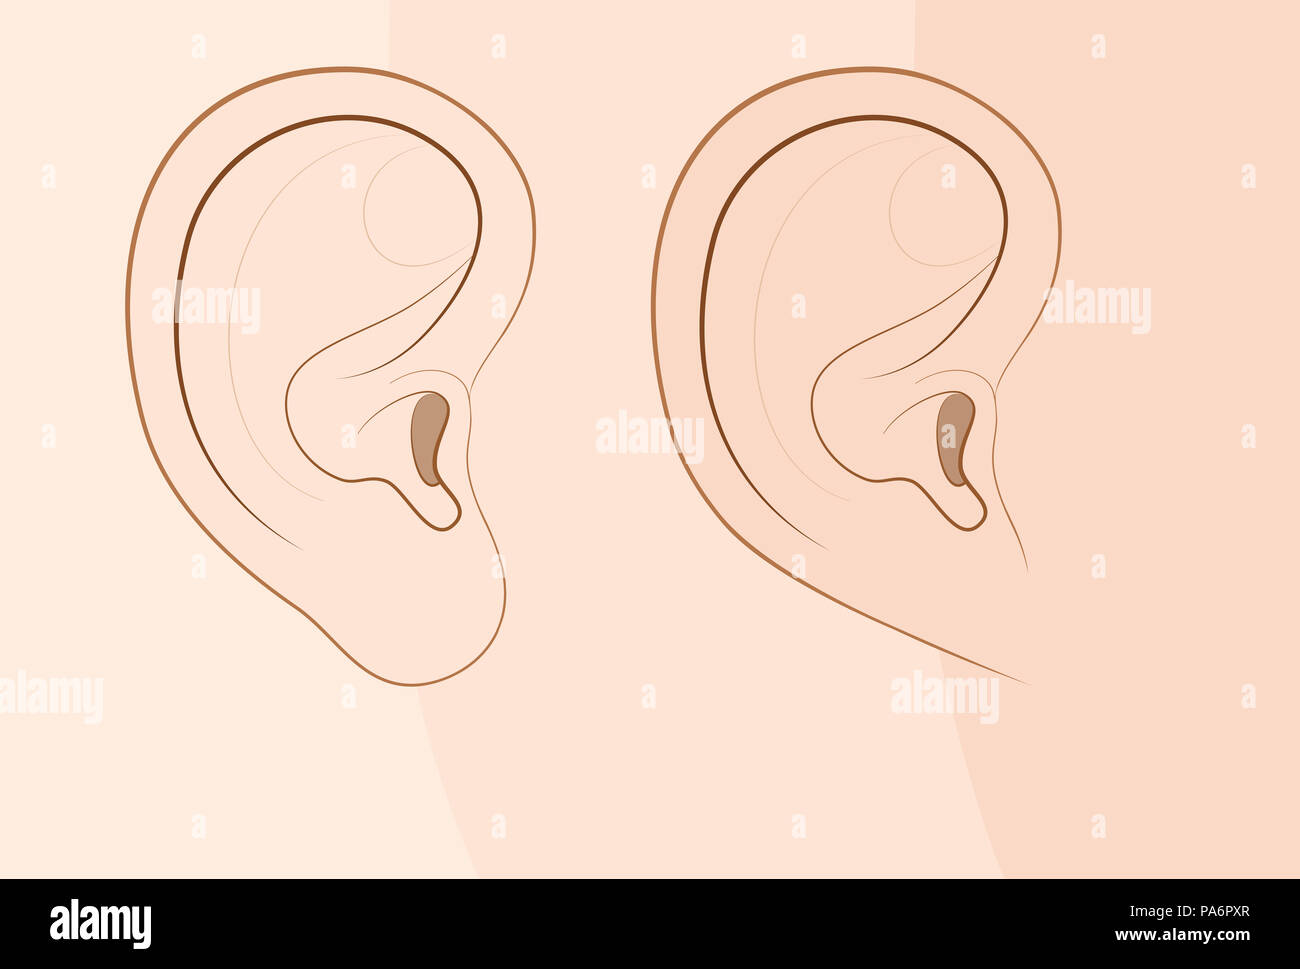 Attached earlobe and free earlobe in comparison. Different looks of the human ear because of recessive gene frequency. Stock Photo